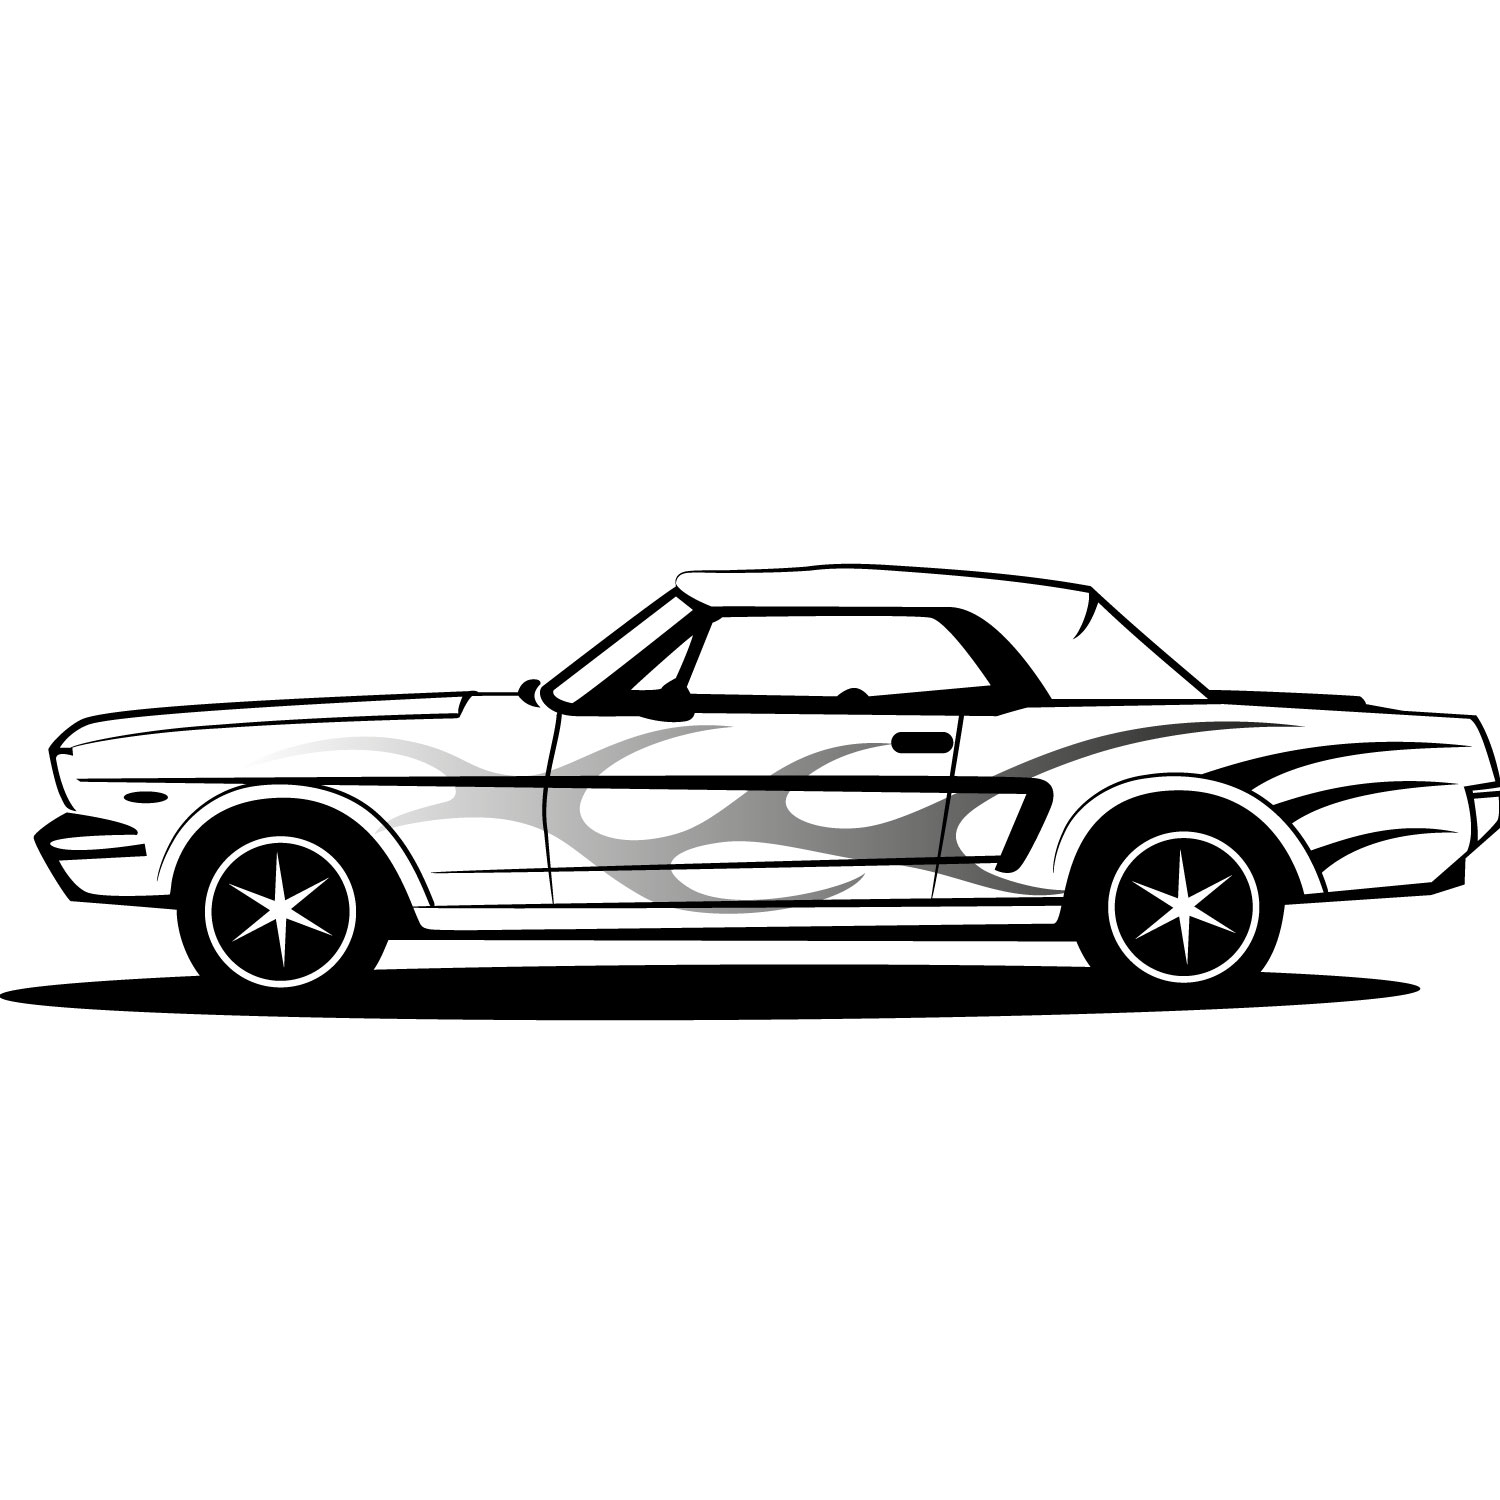 Mustang Car Vector Image | Free vector images, graphics and art ...